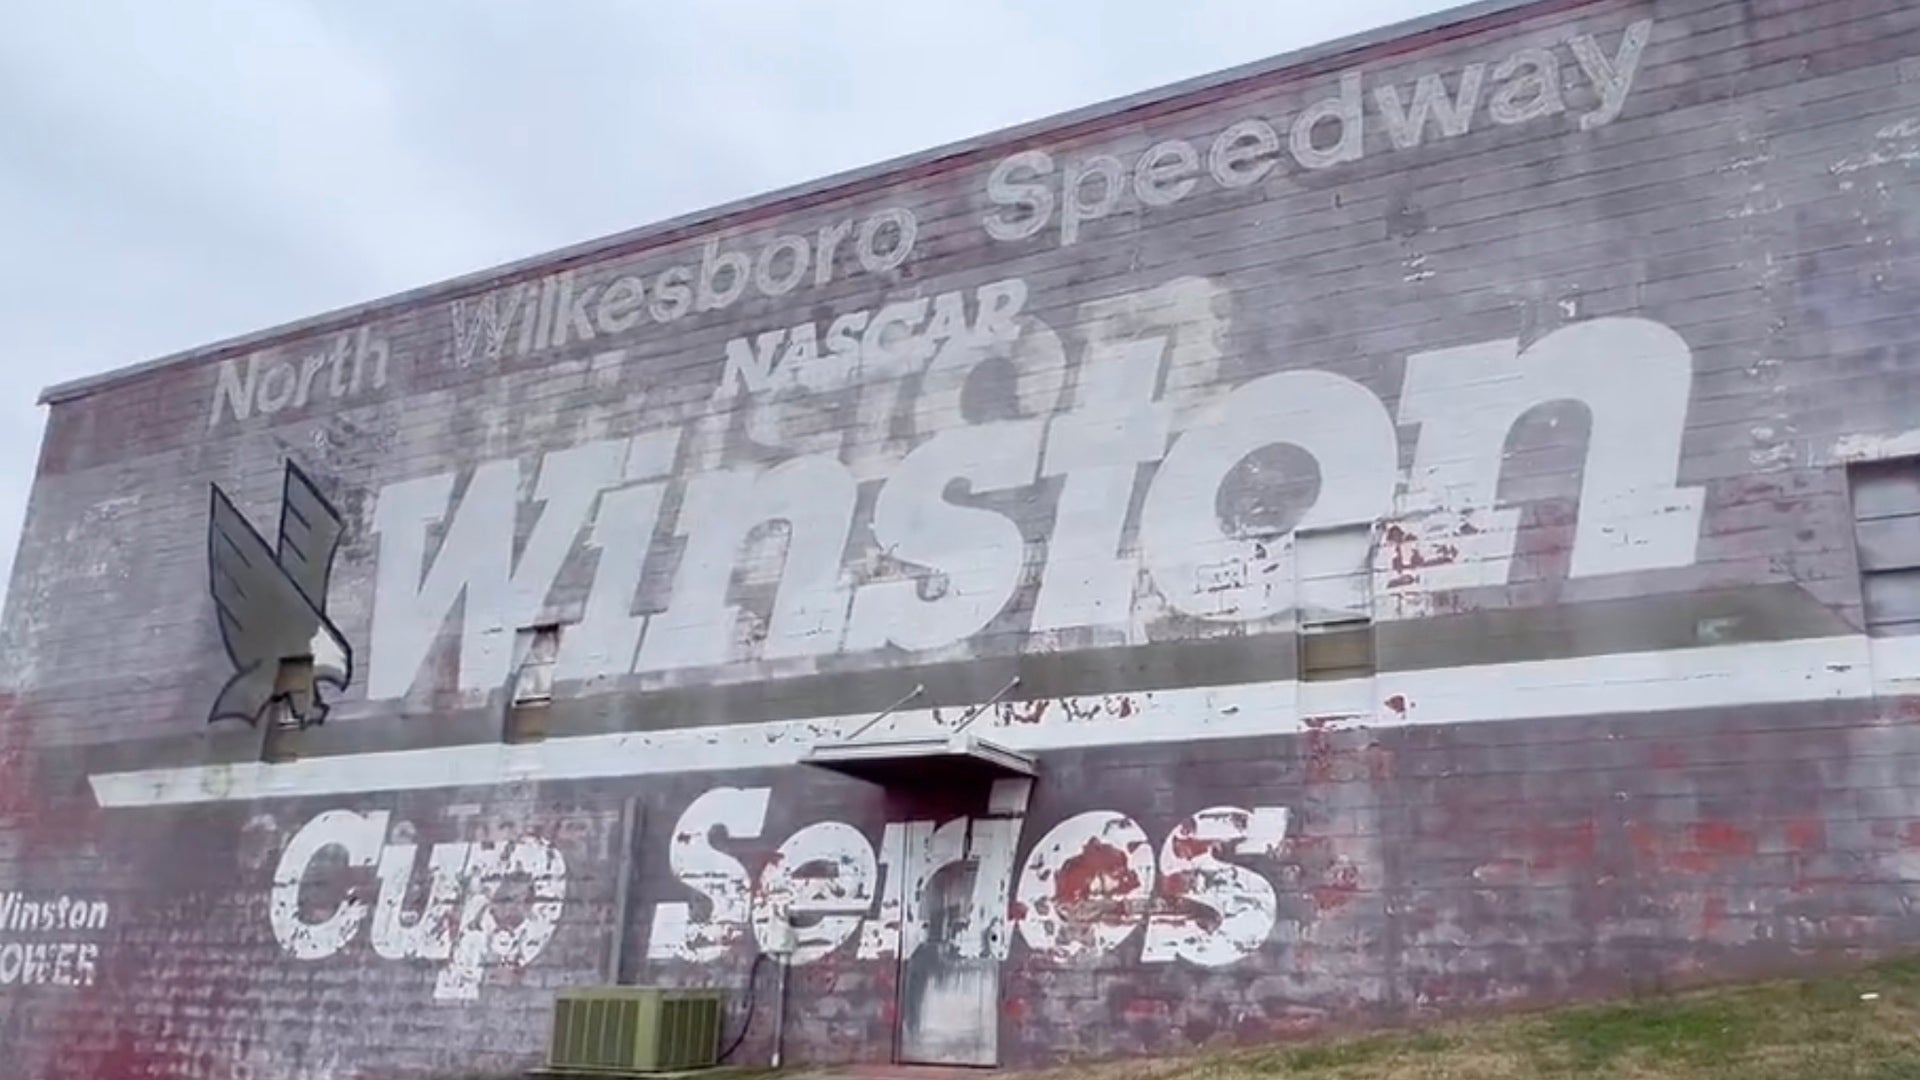 NASCAR’s Bringing Back a Historic Track With Heavy Renovations To Preserve Historic Feel